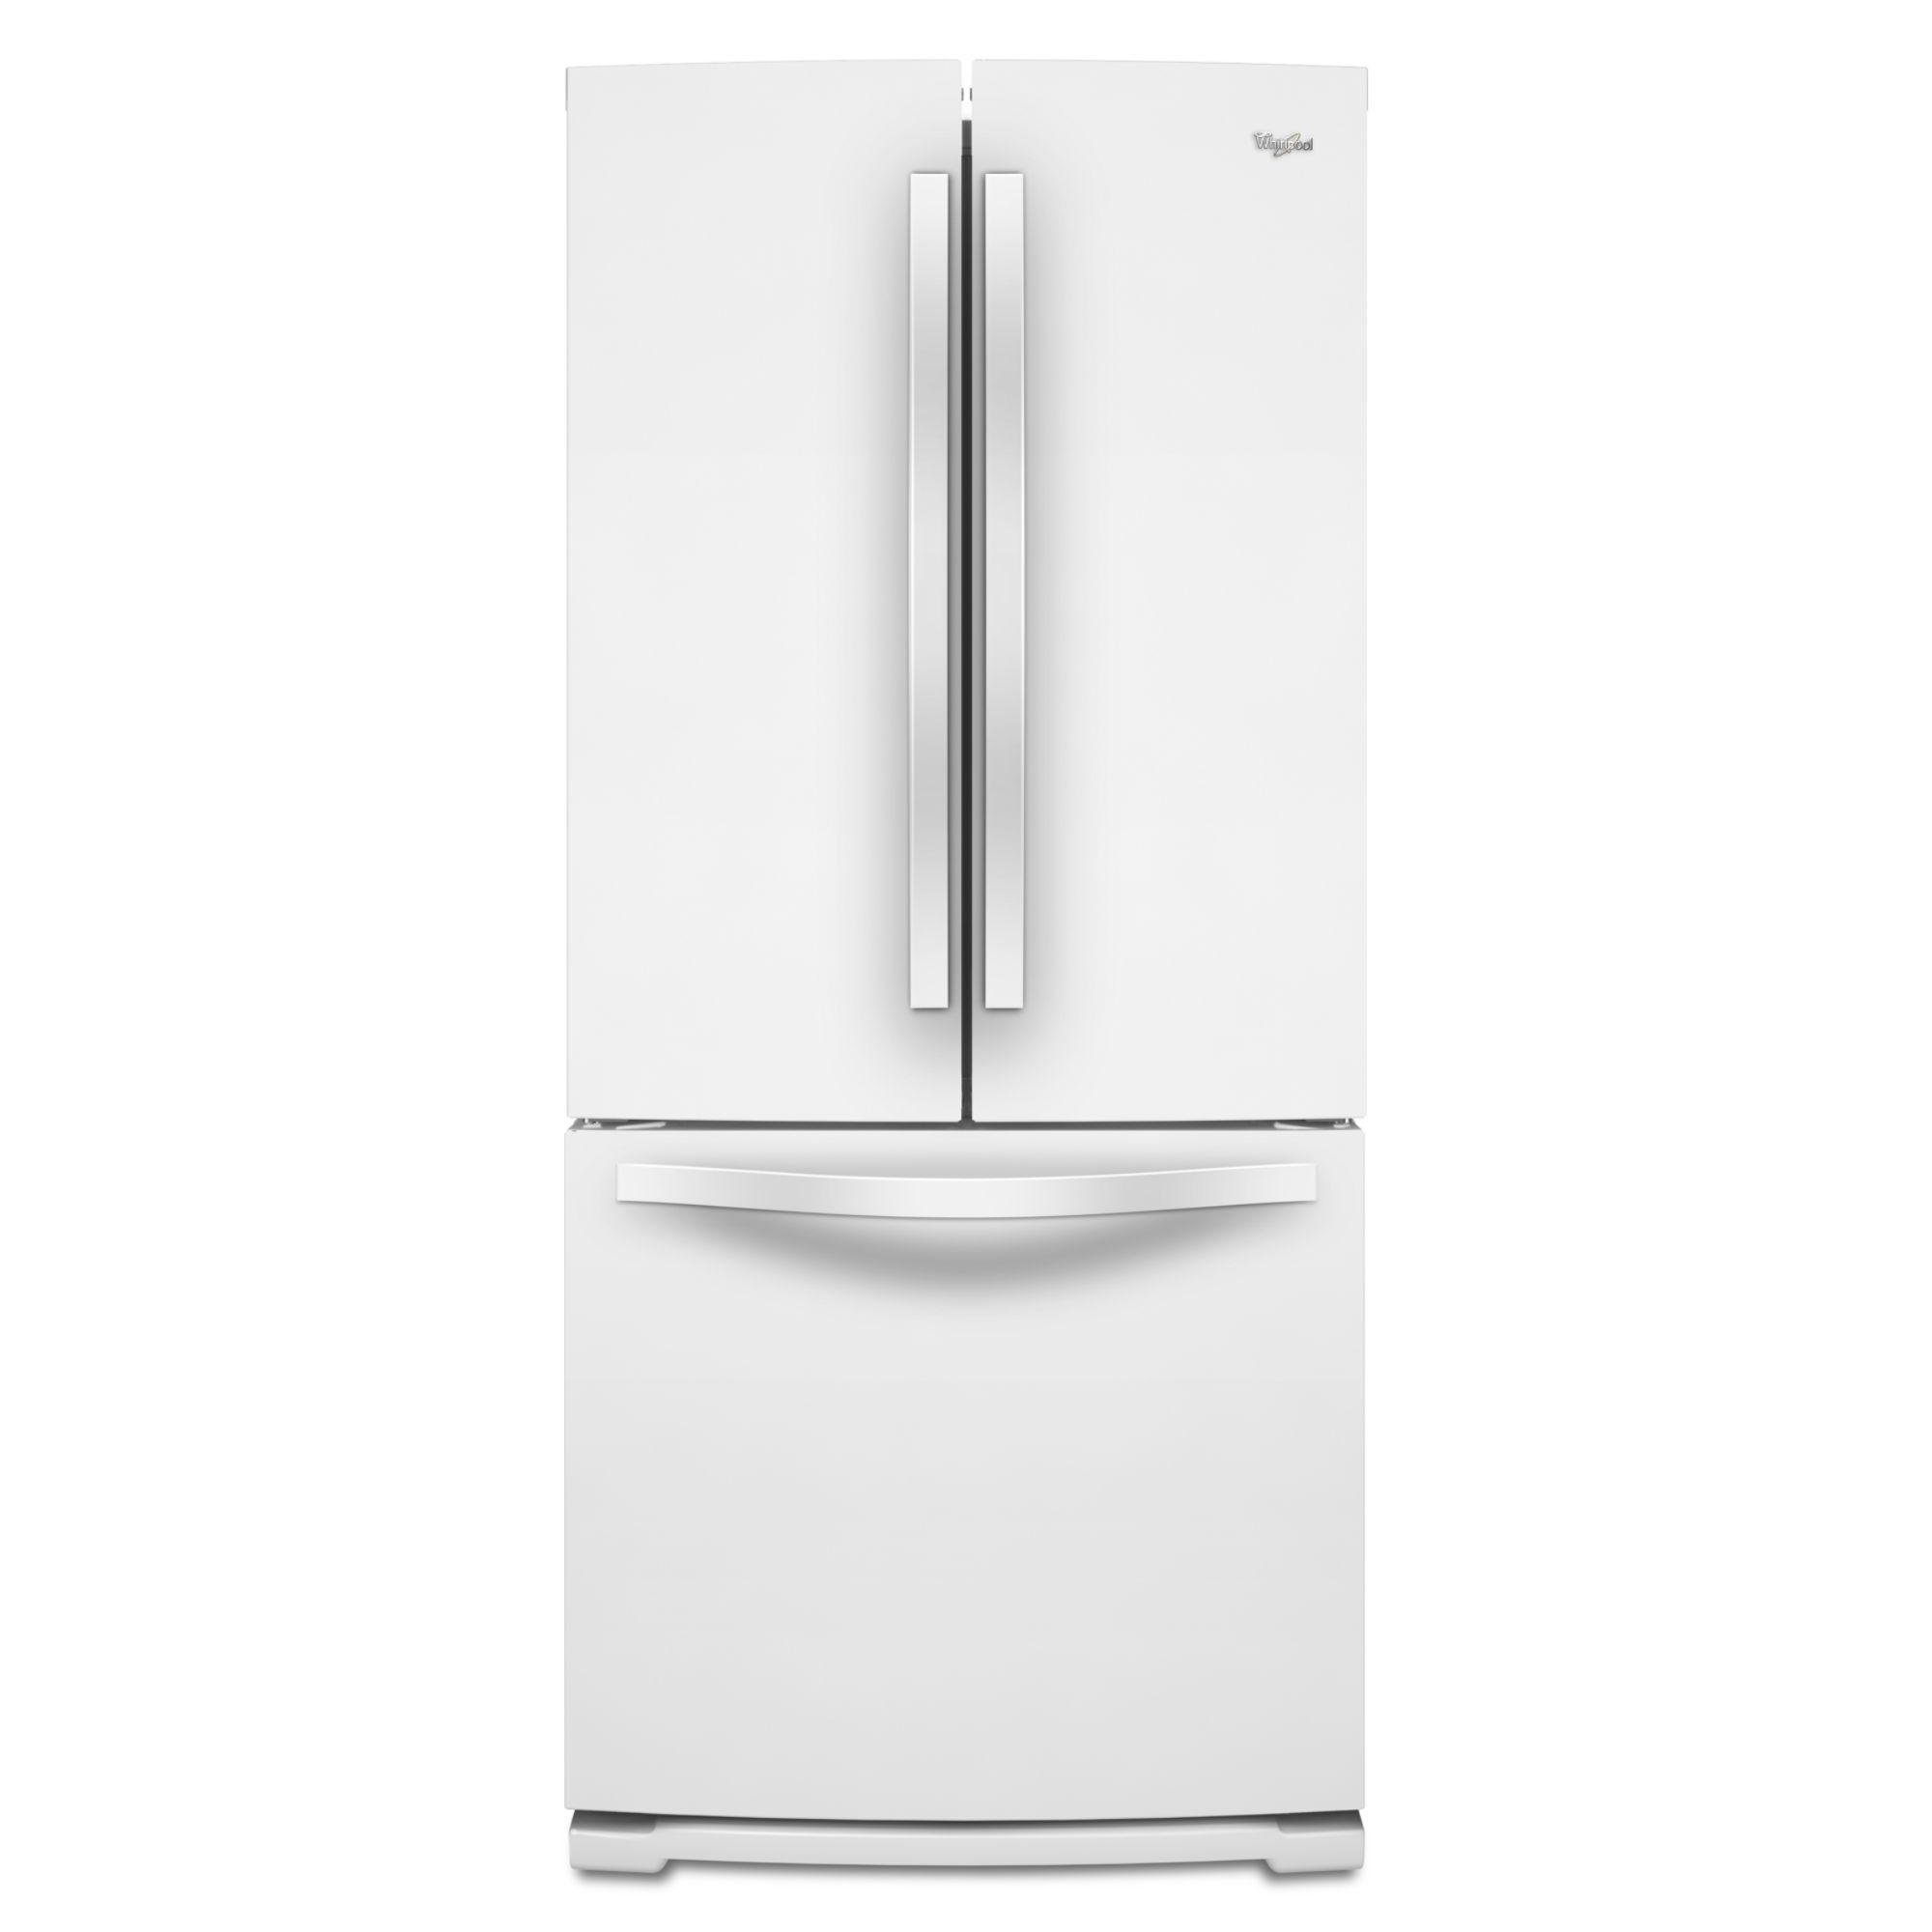 Whirlpool 20 cu. ft. French Door Refrigerator w/ 30 in. Wide Footprint - White